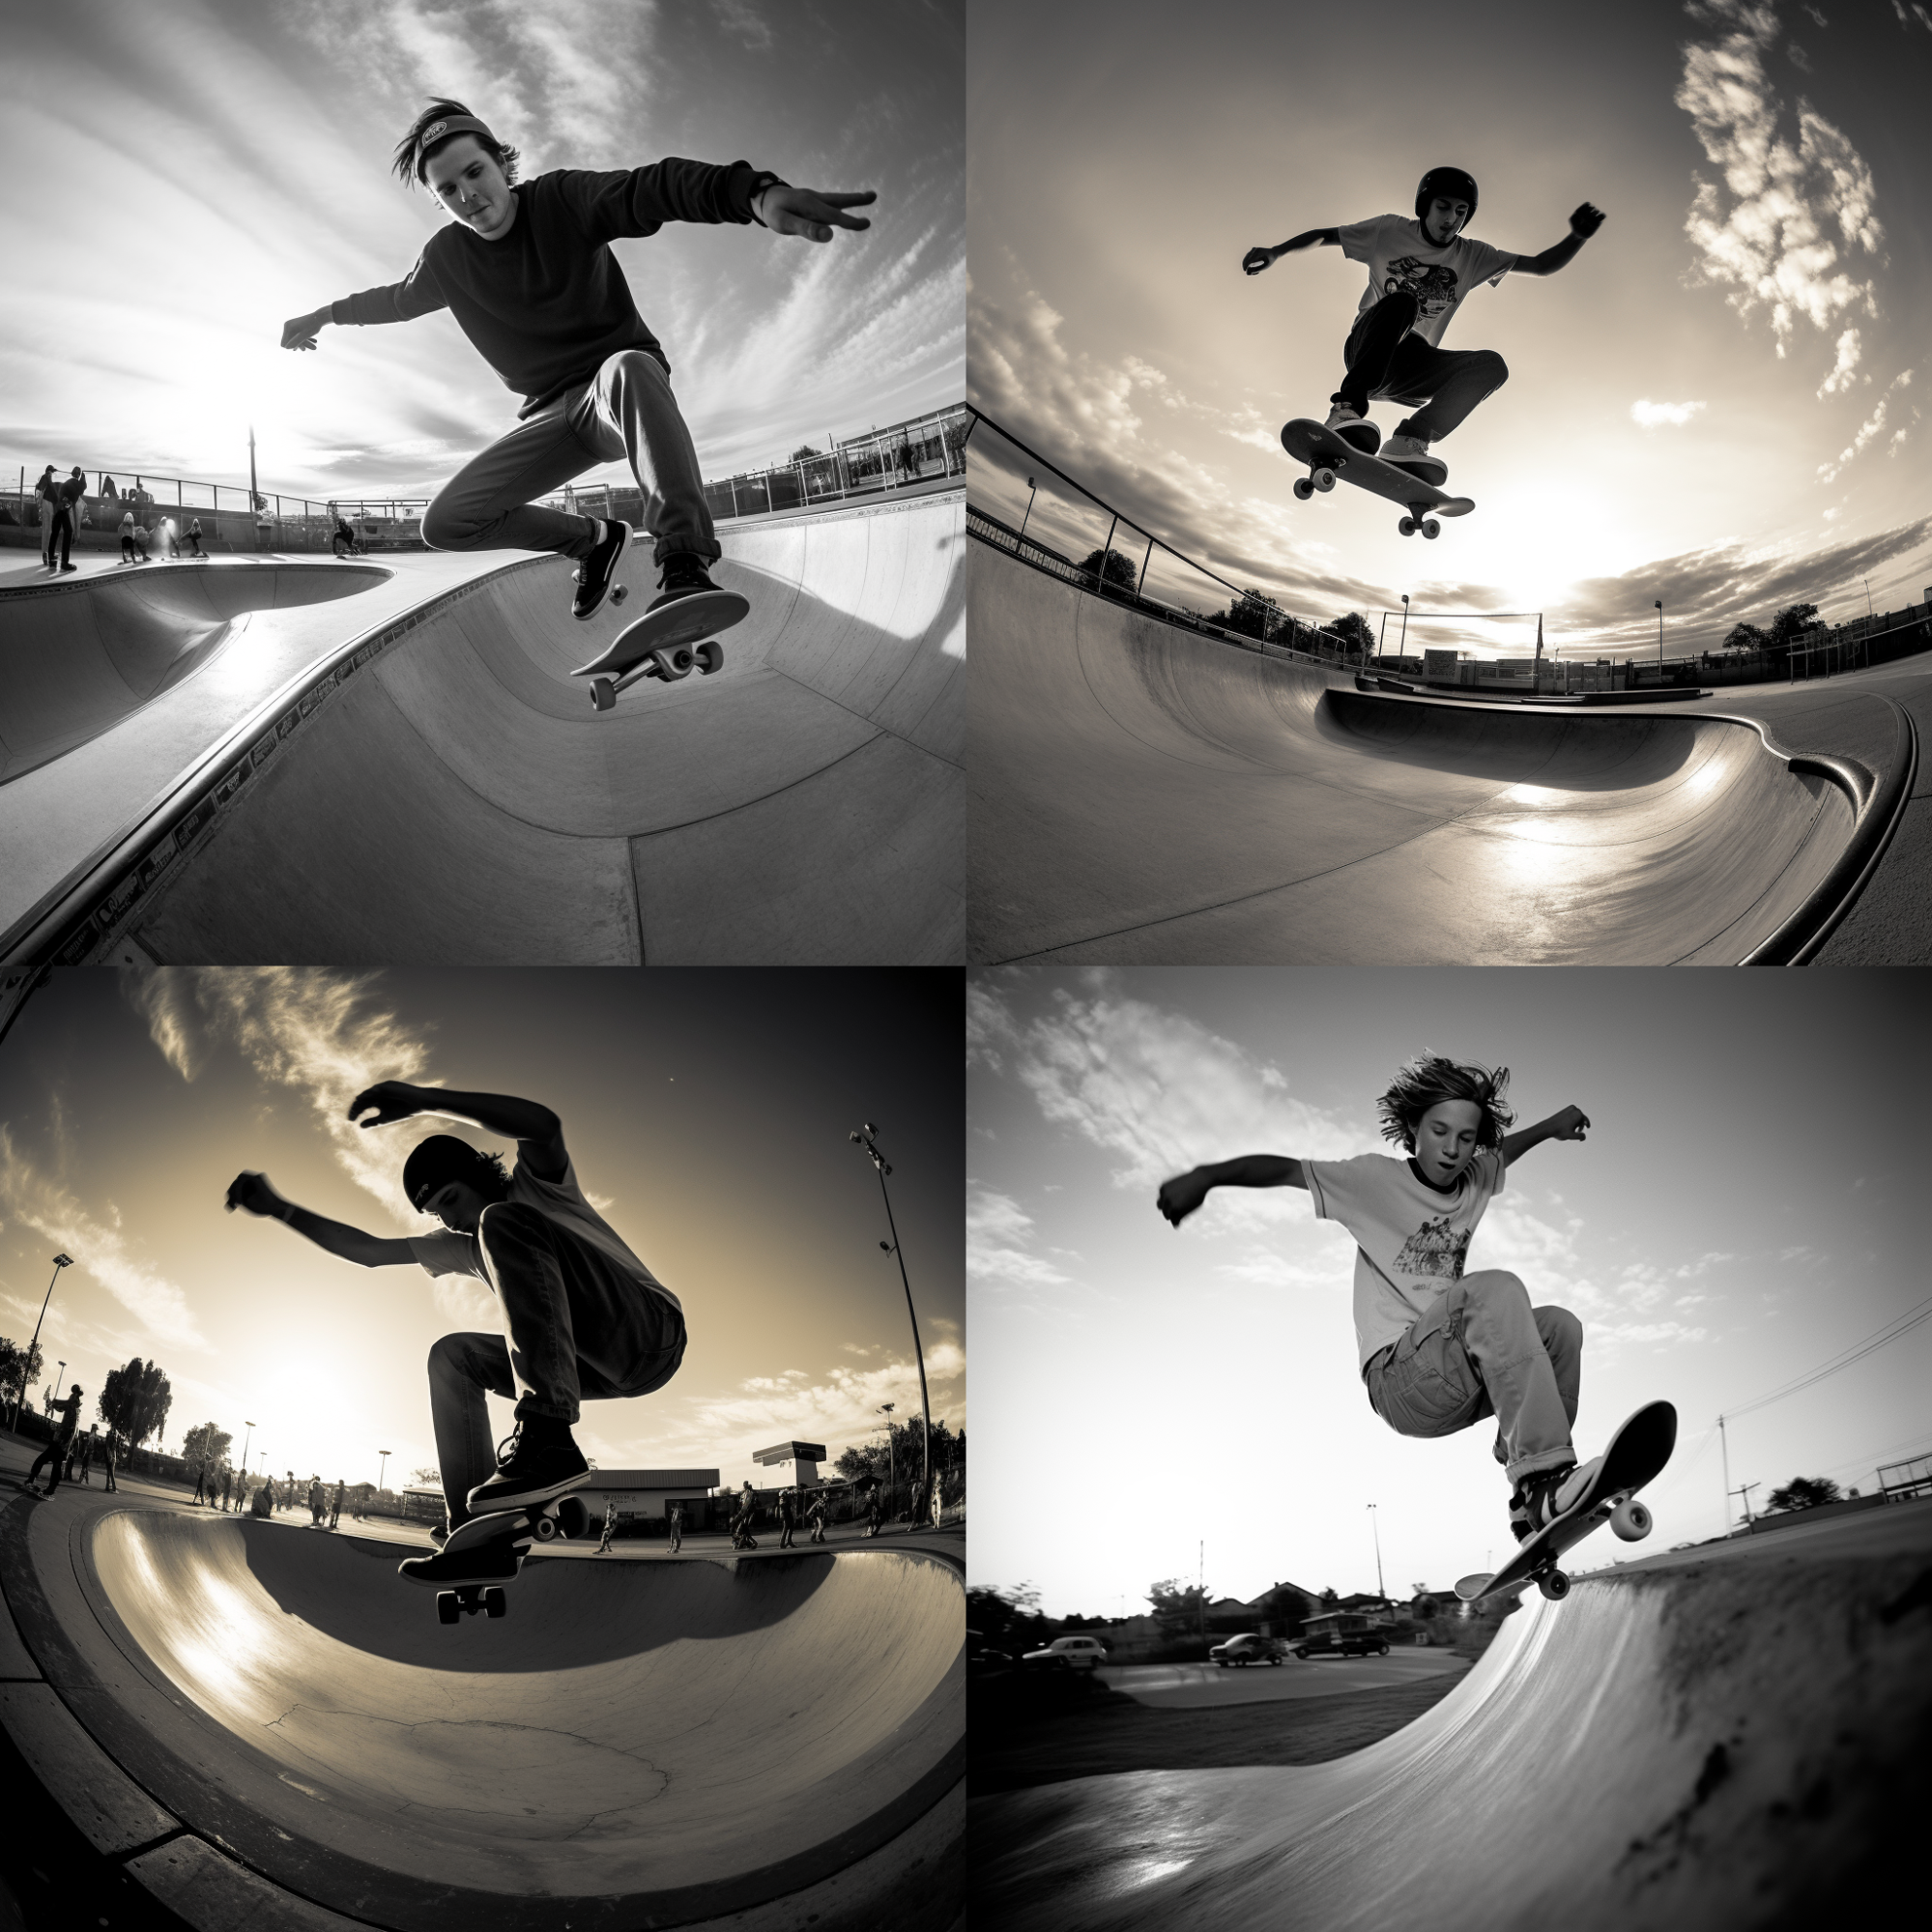 Four image options generated by Midjourney based on a skatepark shenanigans prompt